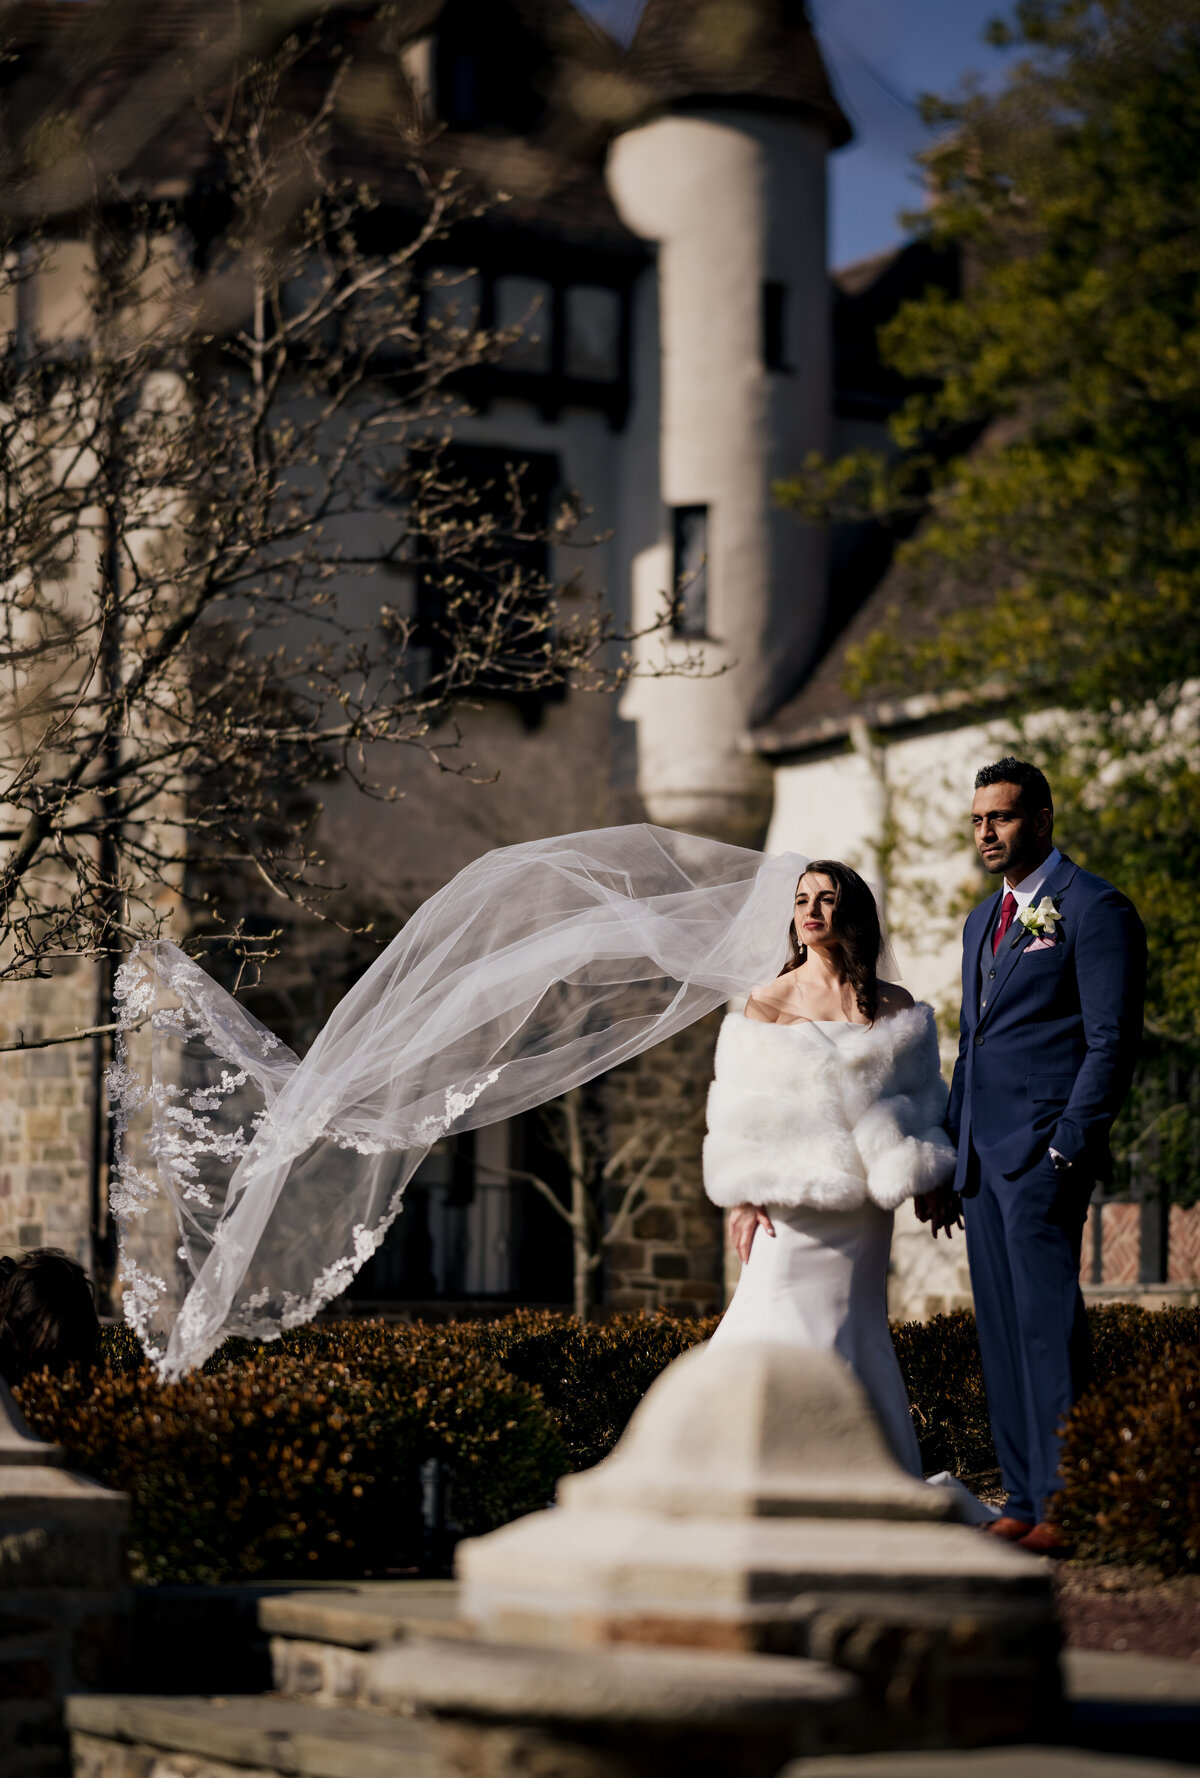 Check out these GORGEOUS wedding photos at Pleasntdale Chateau wedding photos by Ishan Fotografi.